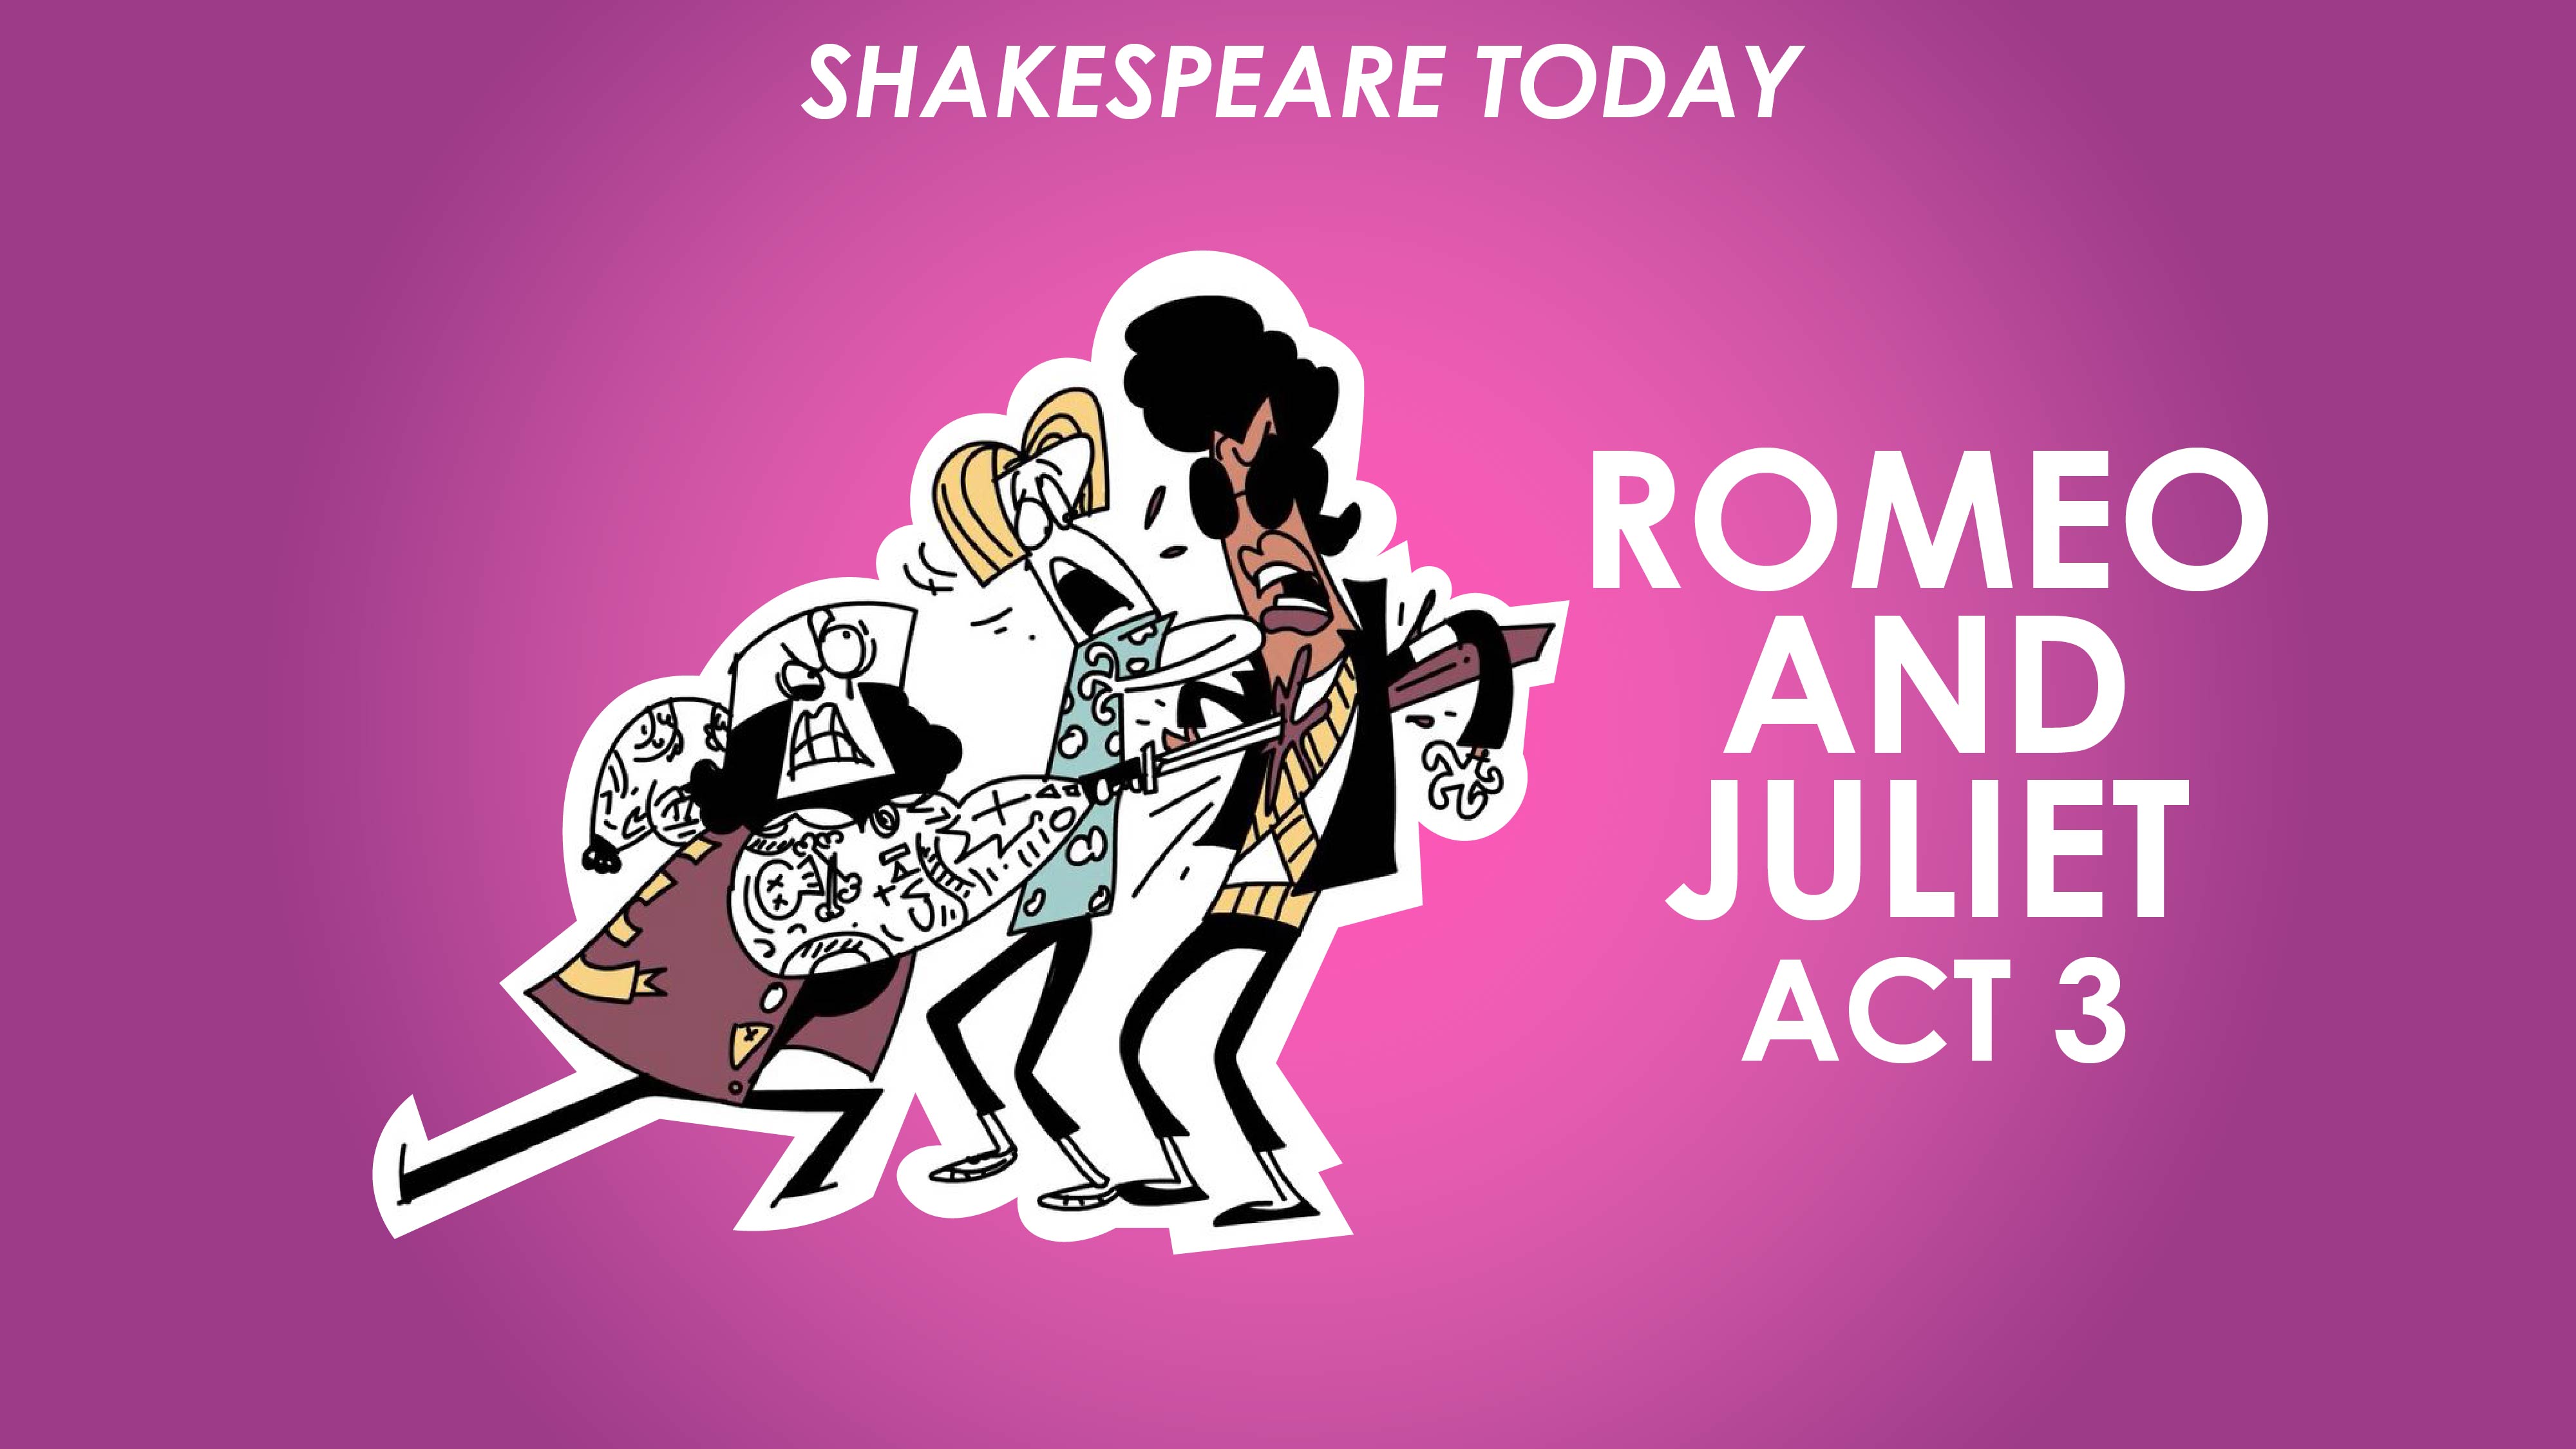 Romeo and Juliet Theme of Death and Mortality Shakespeare Today Series